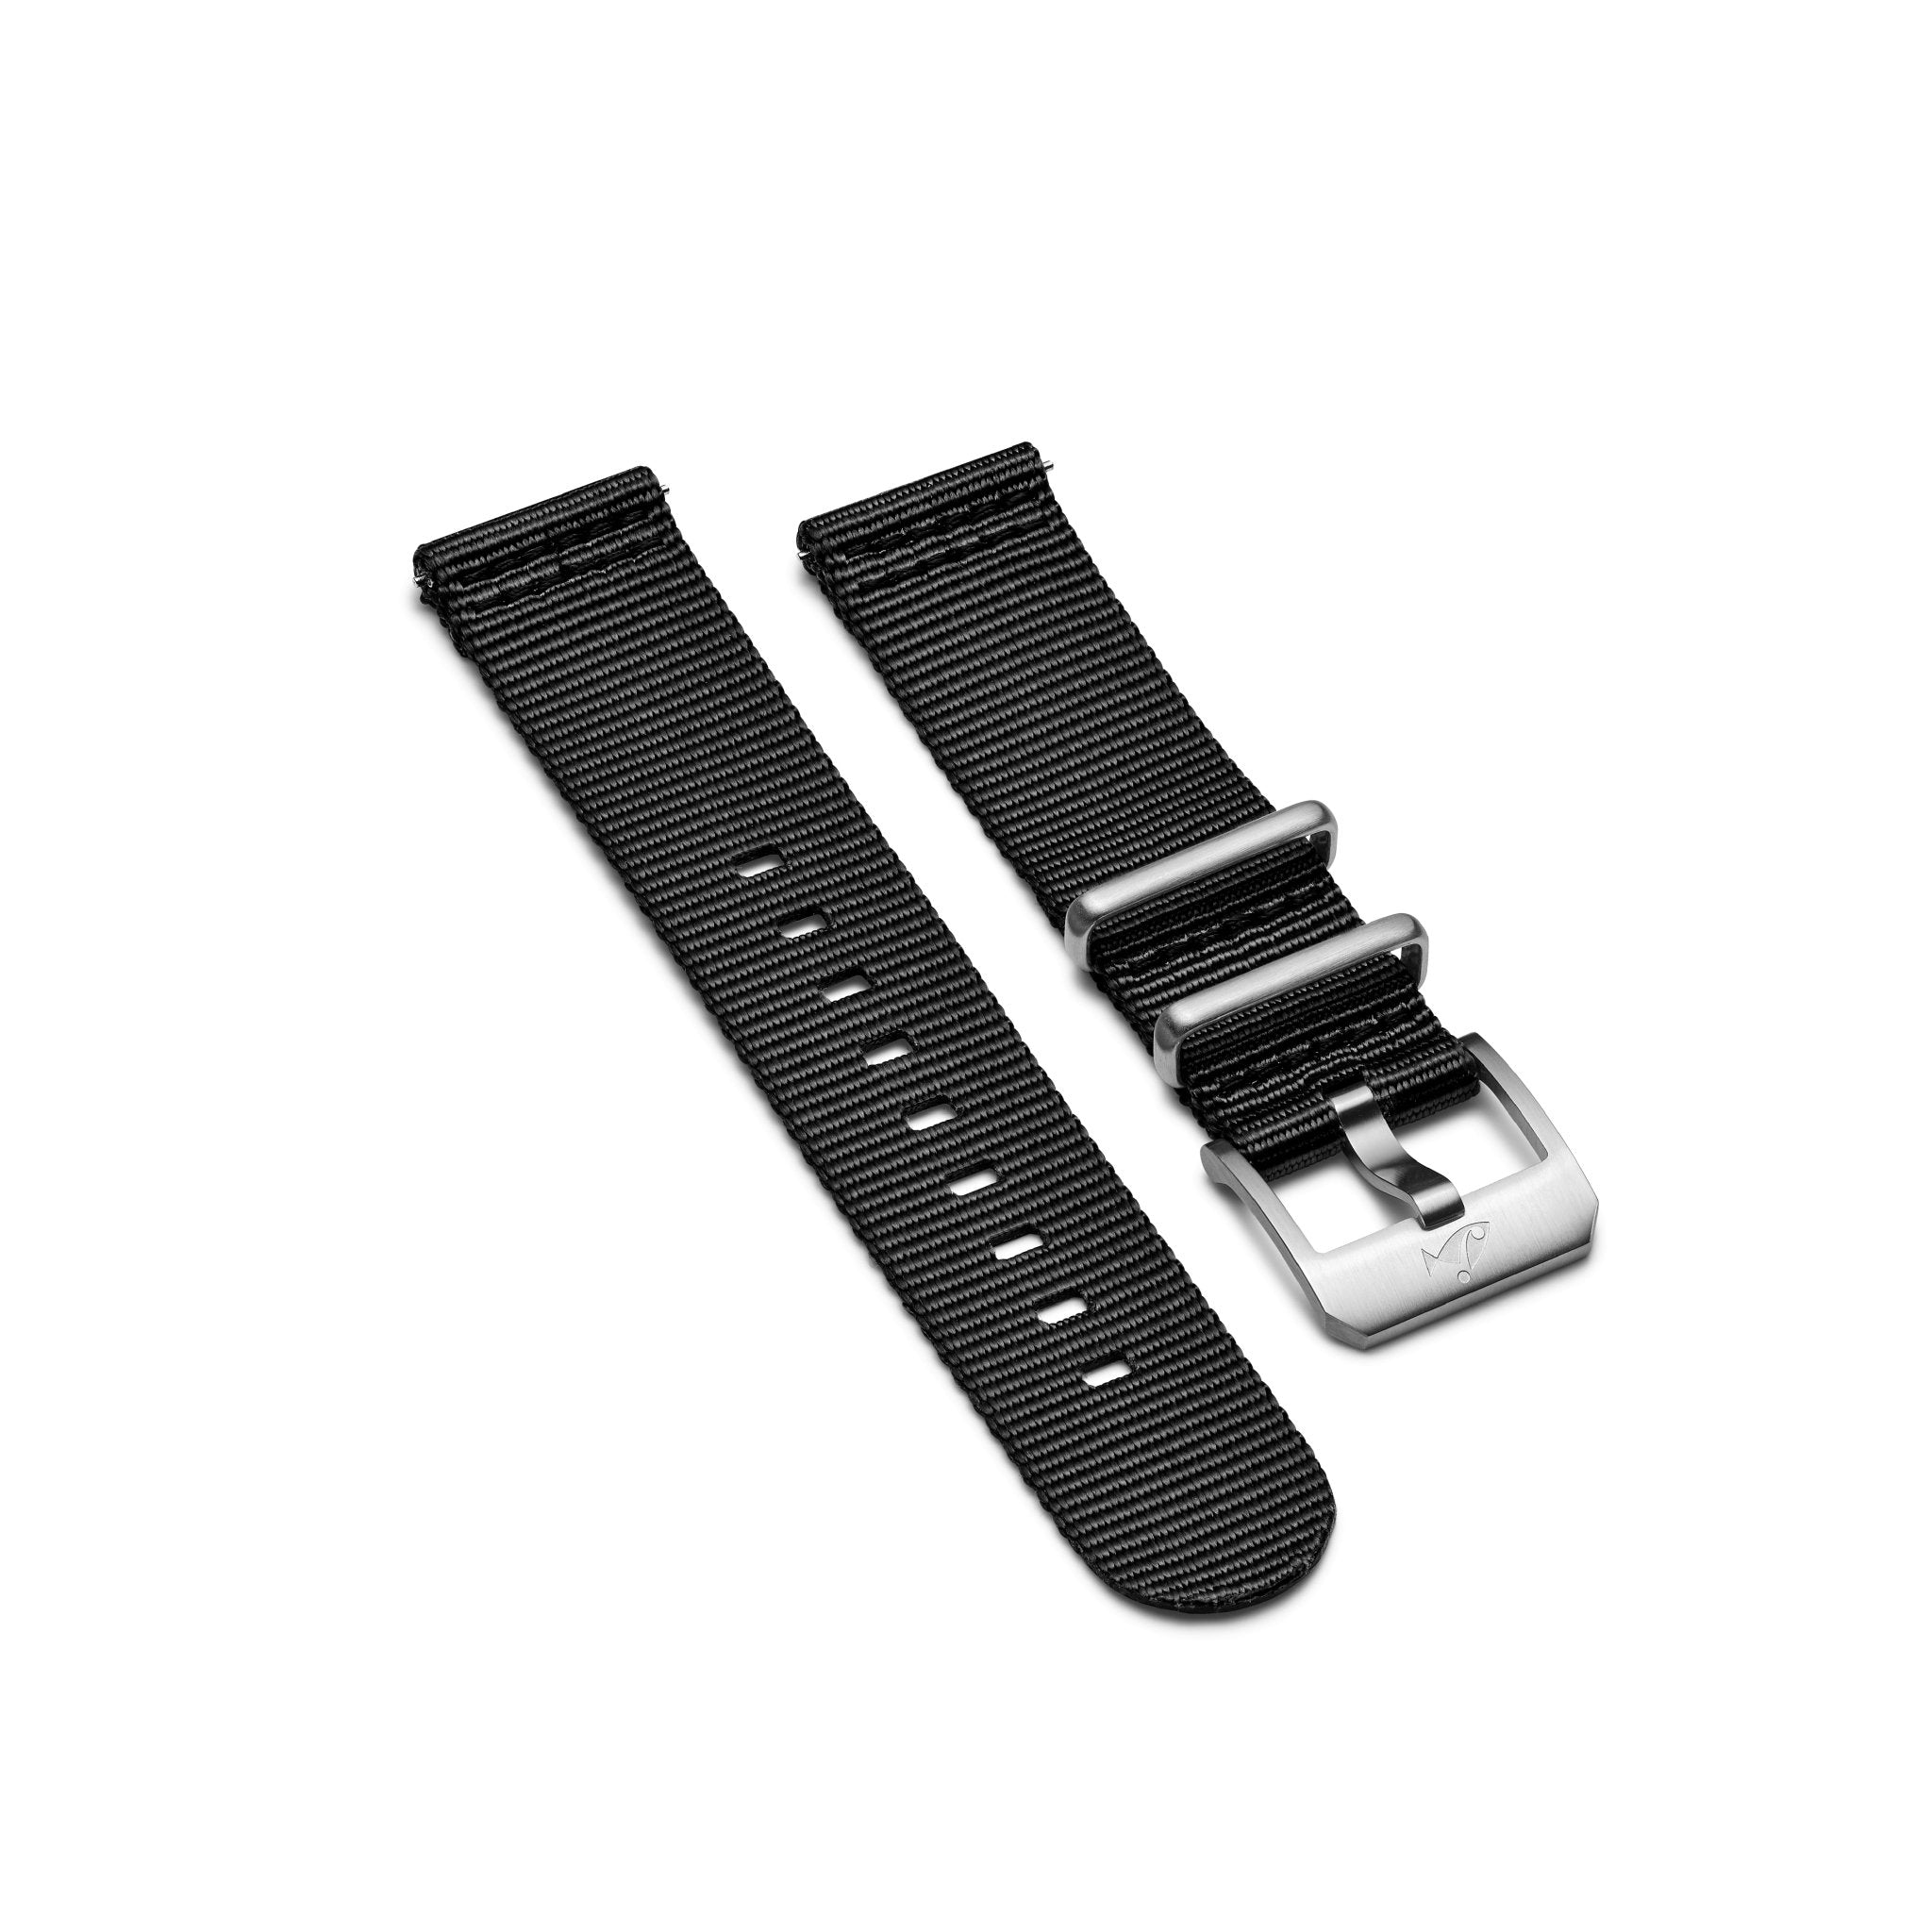 NATO strap with folding buckle, Black - DOXA Watches US